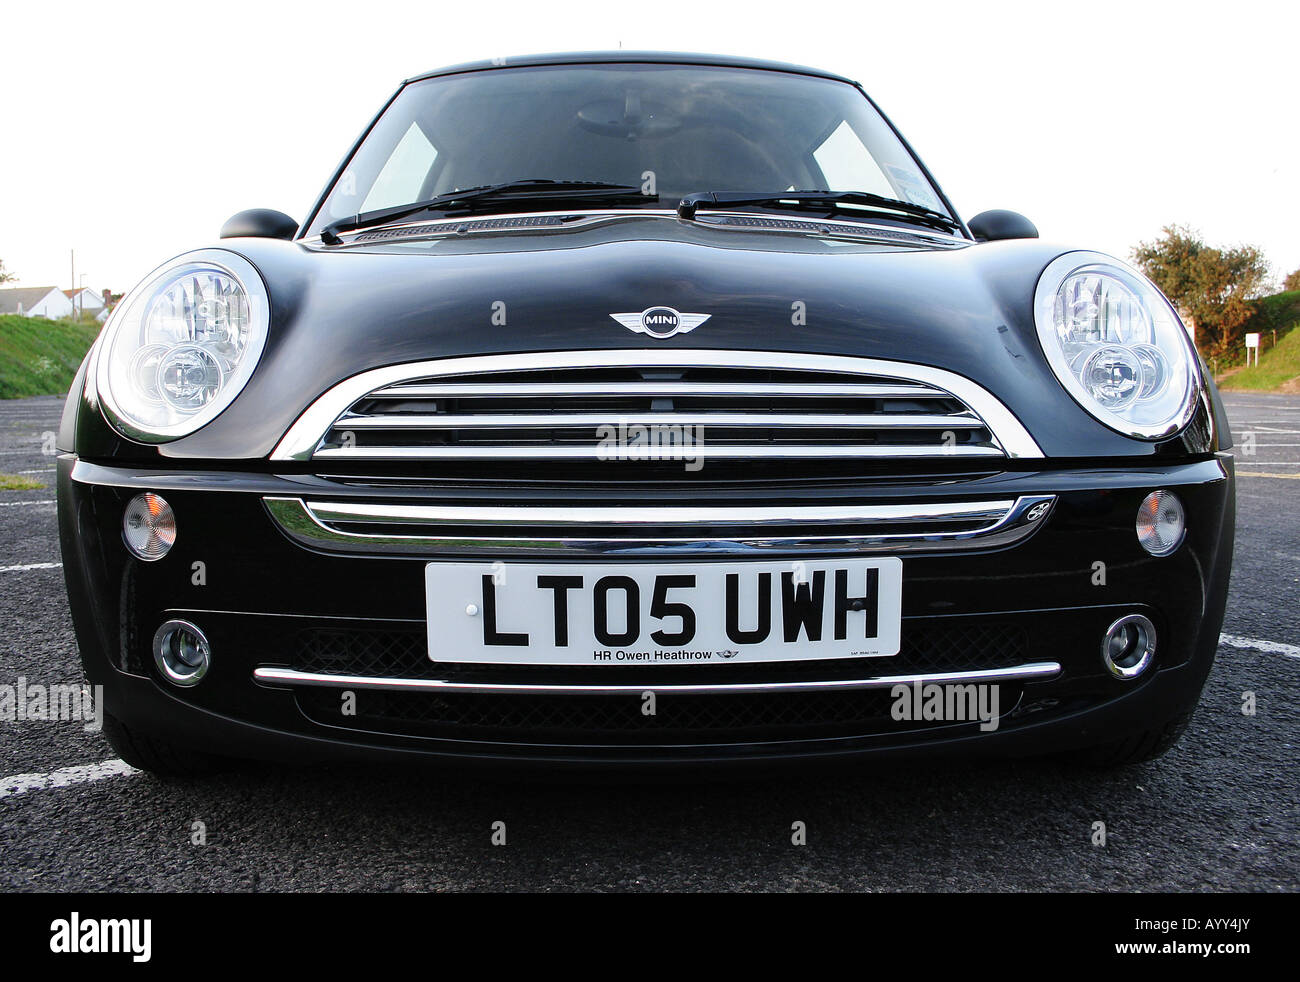 The front end of a black mini cooper. Stock Photo